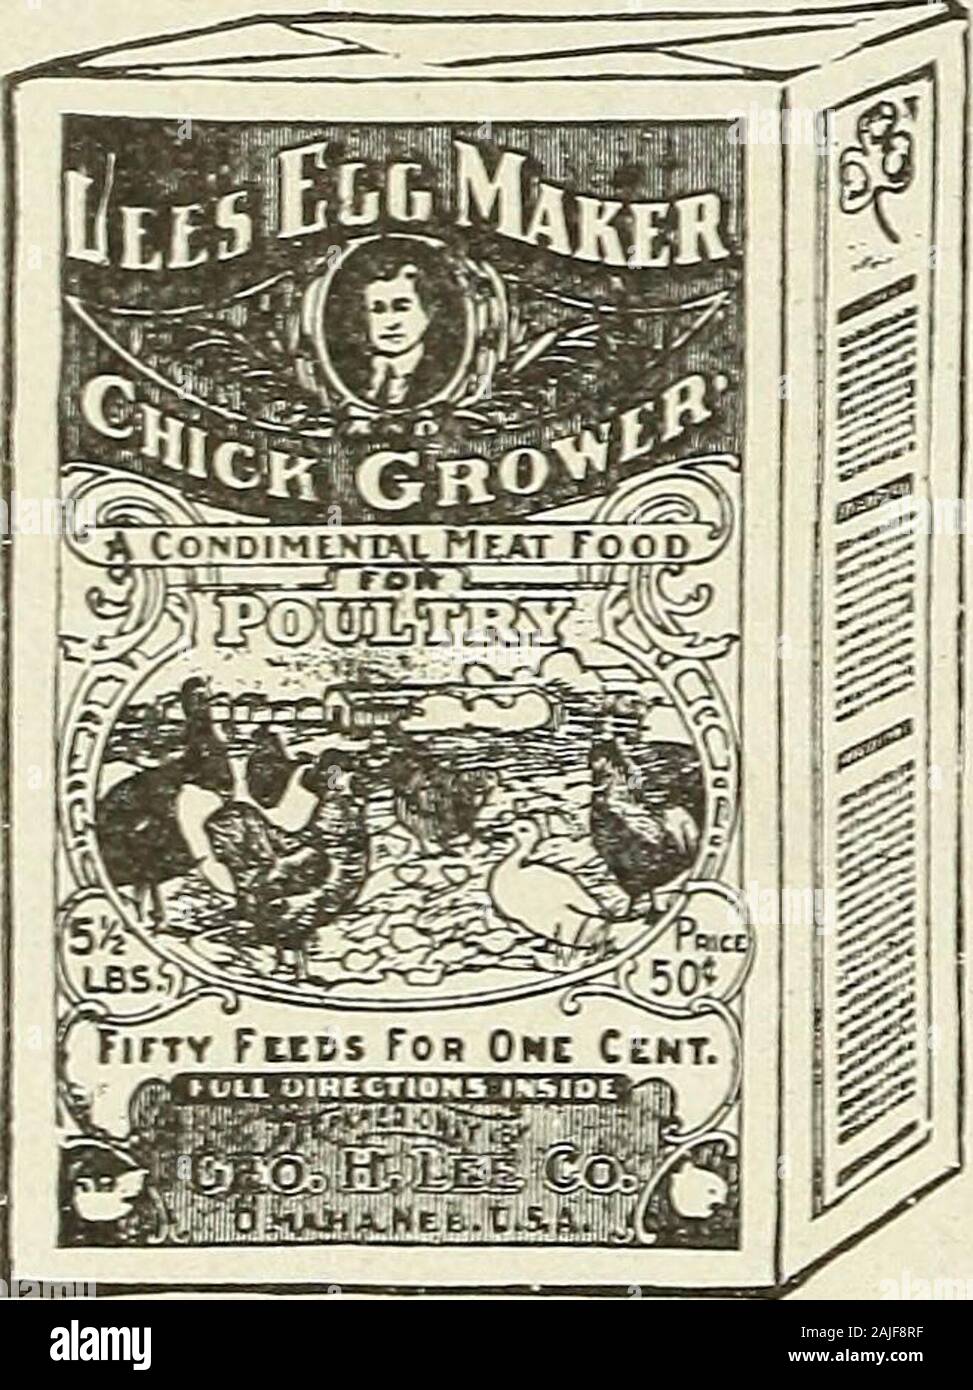 Schultz's seeds : 1913 . 00 lbs., $3.75. LEES EGG MAKER AND CHICK GROWER.—Lees Egg Maker is largely granu-lated blood (deodorized), the most highly concentrated form of meat food, one pound ofwhich is equal to 16 pounds of fresh meat, and which has an actual tested protein feedingvalue in excess of 80 per cent. There is not one ounce of bran, sand, shell, or othercheap and worthless filler in our product. No other poultry food looks like it. smellslike it, or resembles it in any way. Prices: 2^-lb. pkg., 25c; 5^-lb. pkg., 50c. CONKEYS EGG PRODUCER AND LAYING TONIC—To lay eggs regularly thefowl Stock Photo